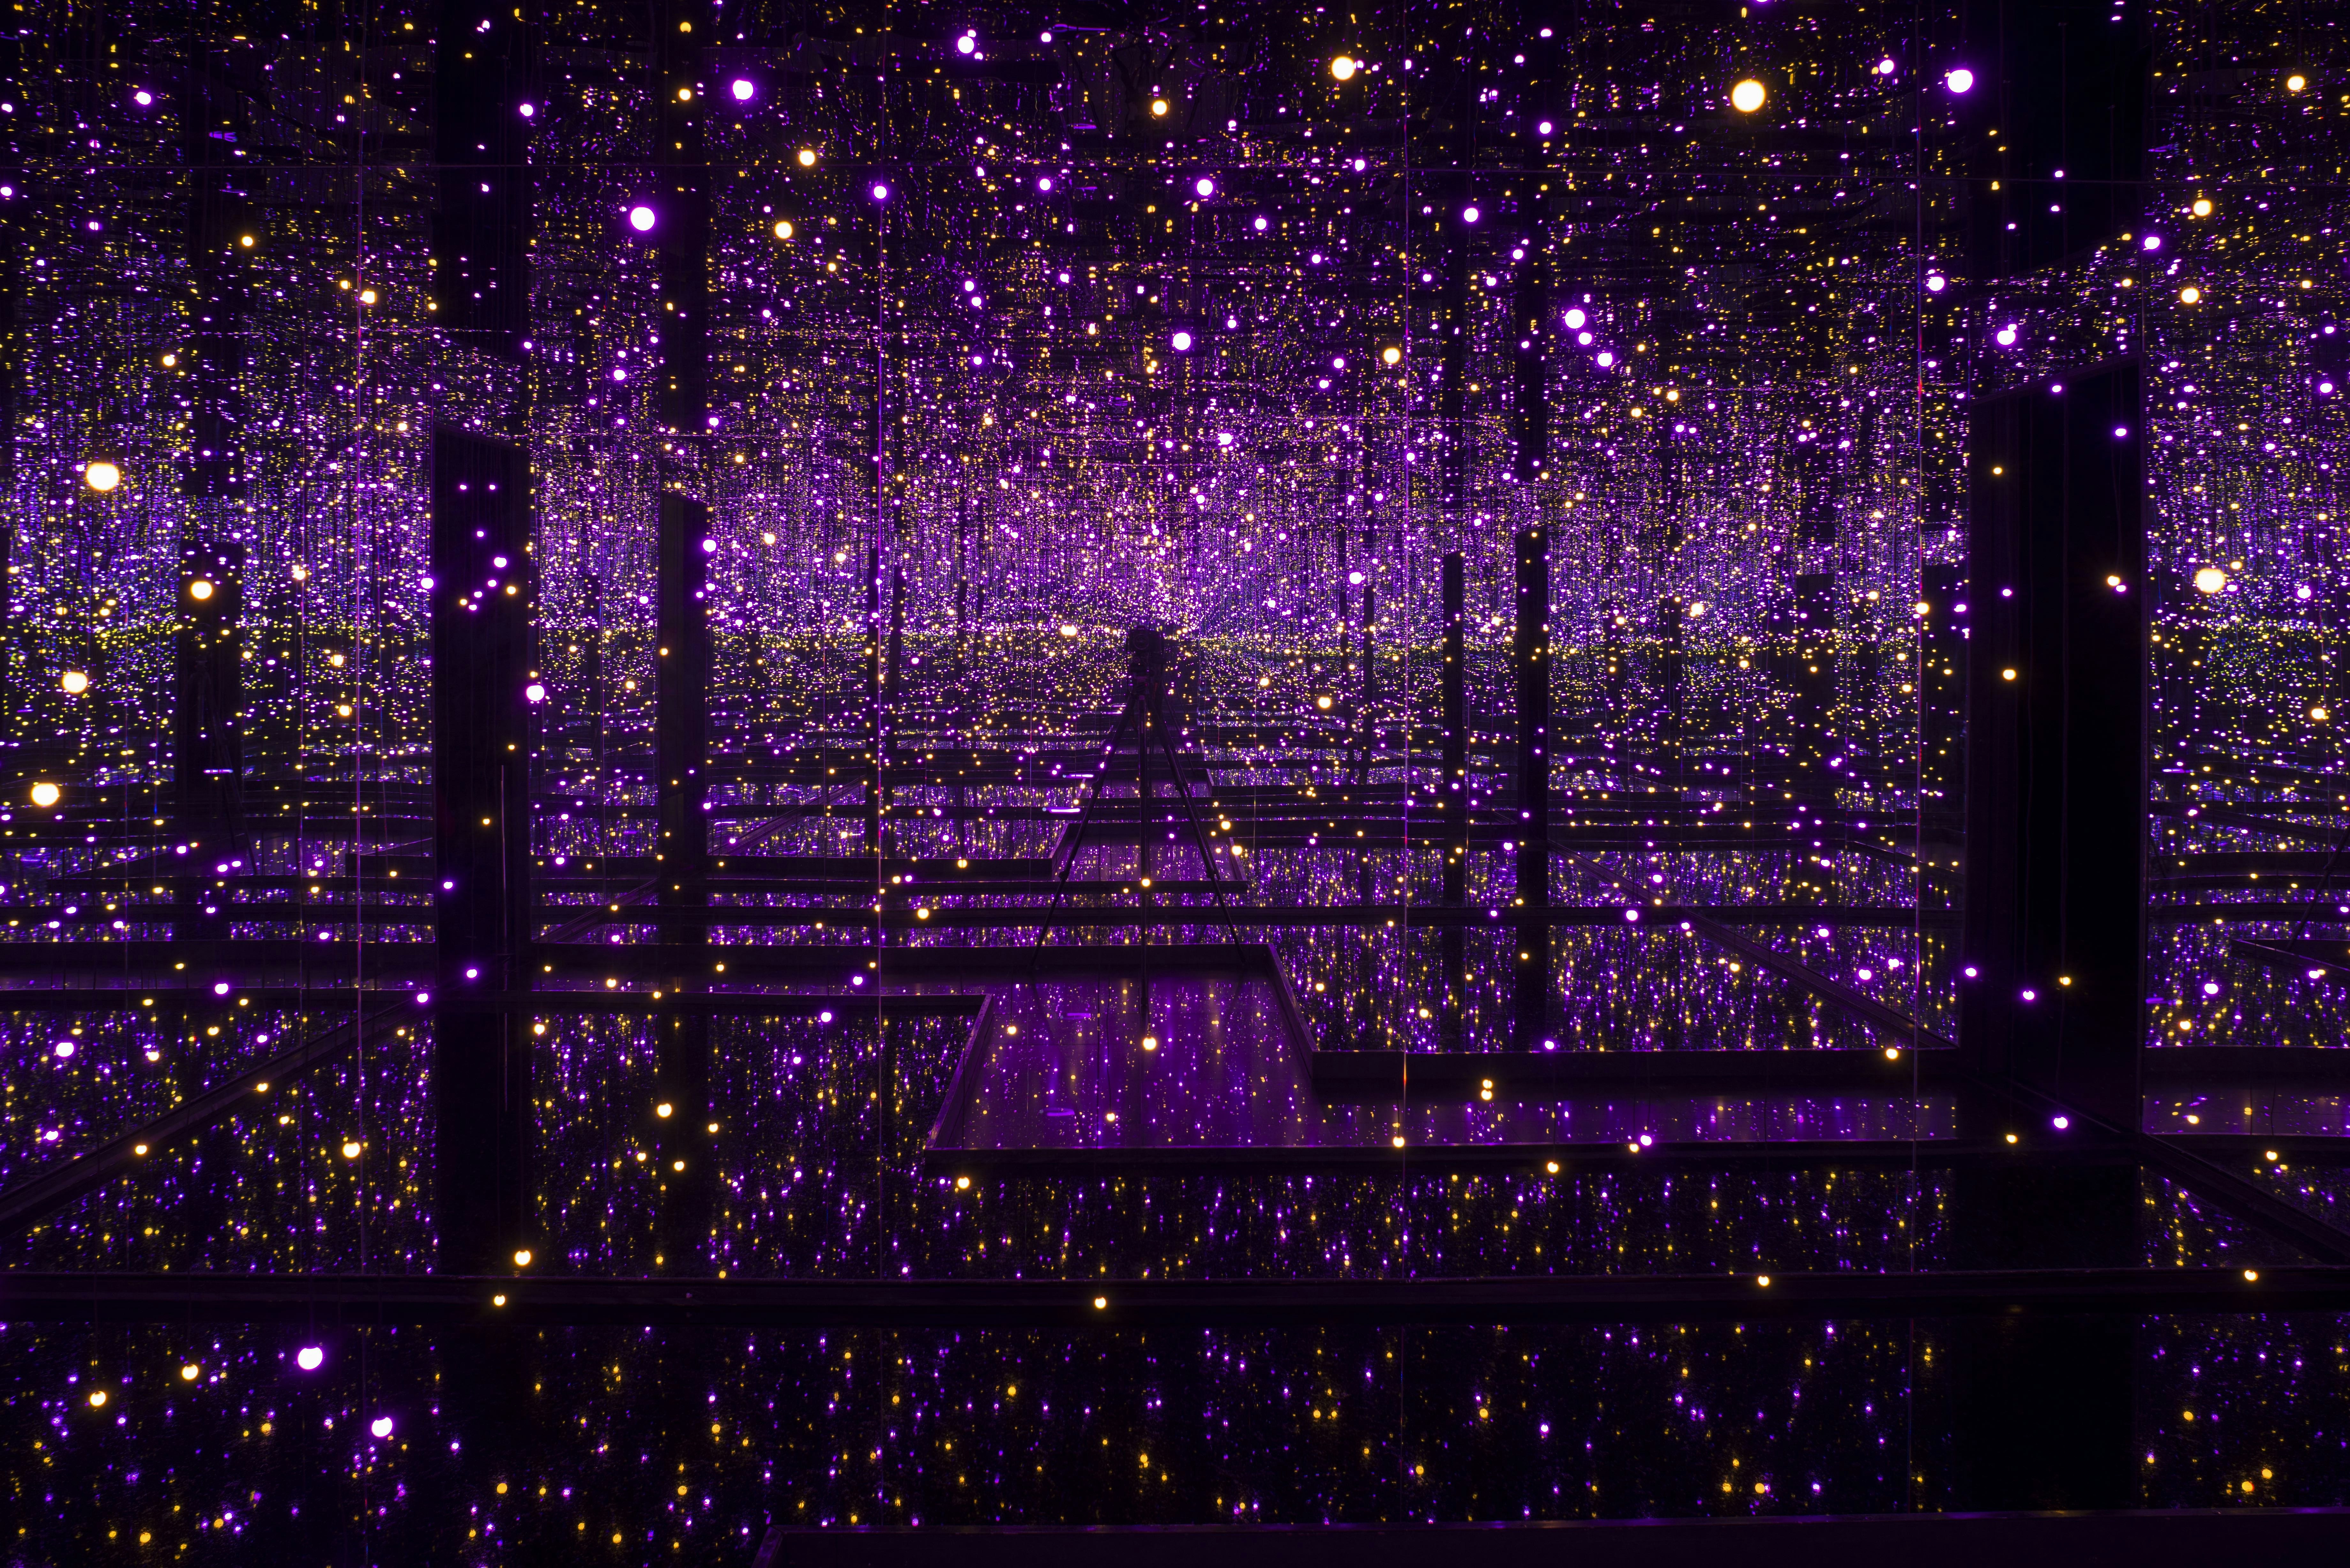 England London Tate Modern Infinity Mirrored Room - Filled with the Brilliance of Life, 2011 RM.jpg